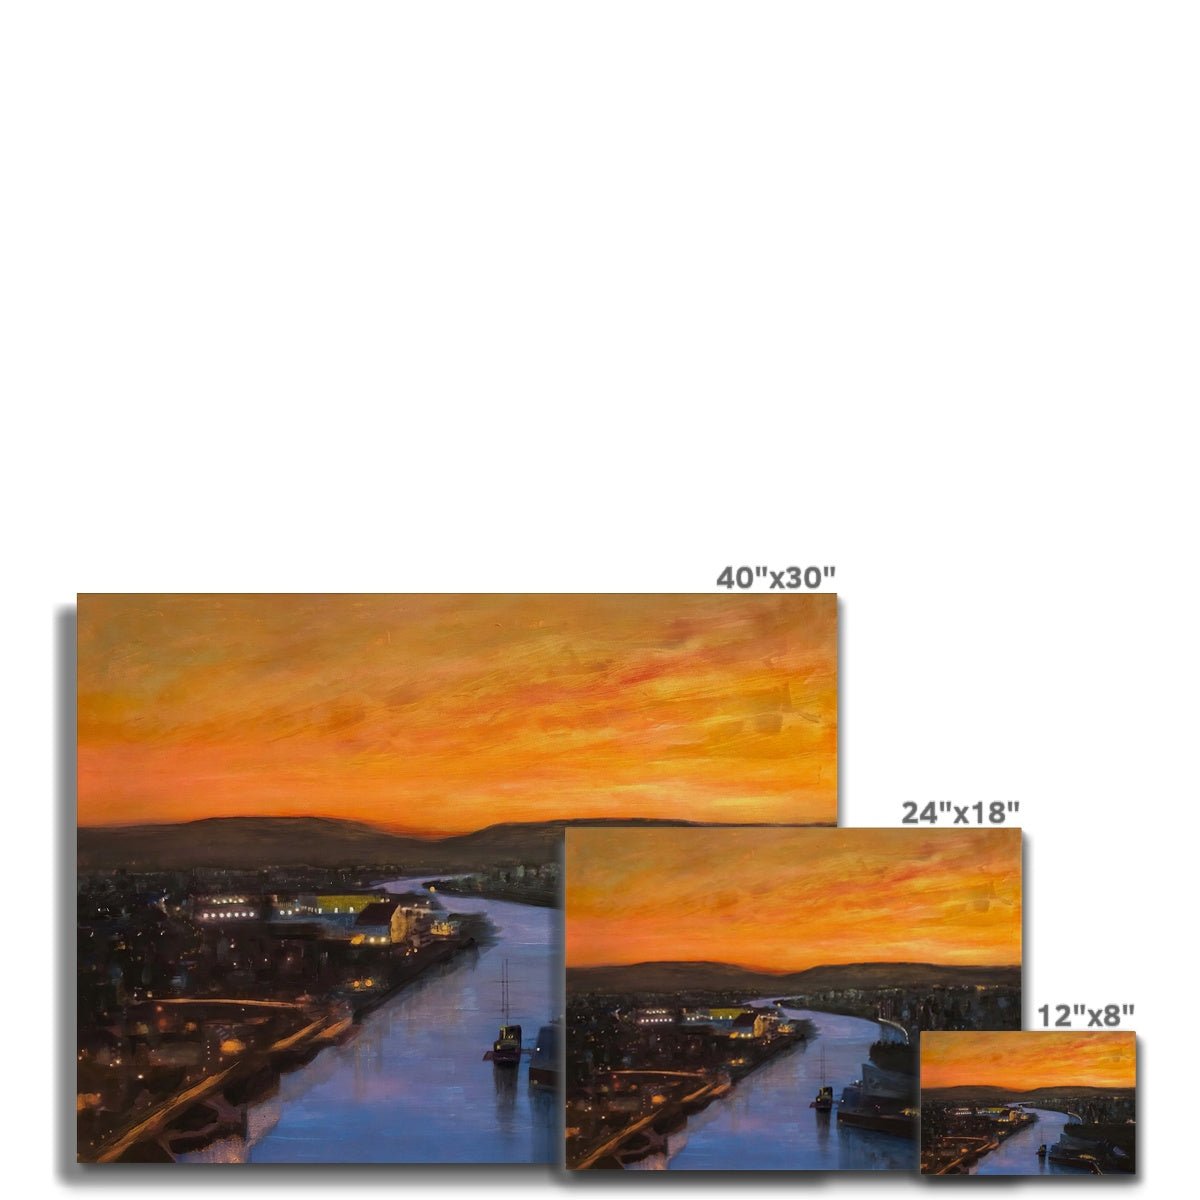 Glasgow Harbour Looking West Painting | Canvas From Scotland-Contemporary Stretched Canvas Prints-Edinburgh & Glasgow Art Gallery-Paintings, Prints, Homeware, Art Gifts From Scotland By Scottish Artist Kevin Hunter